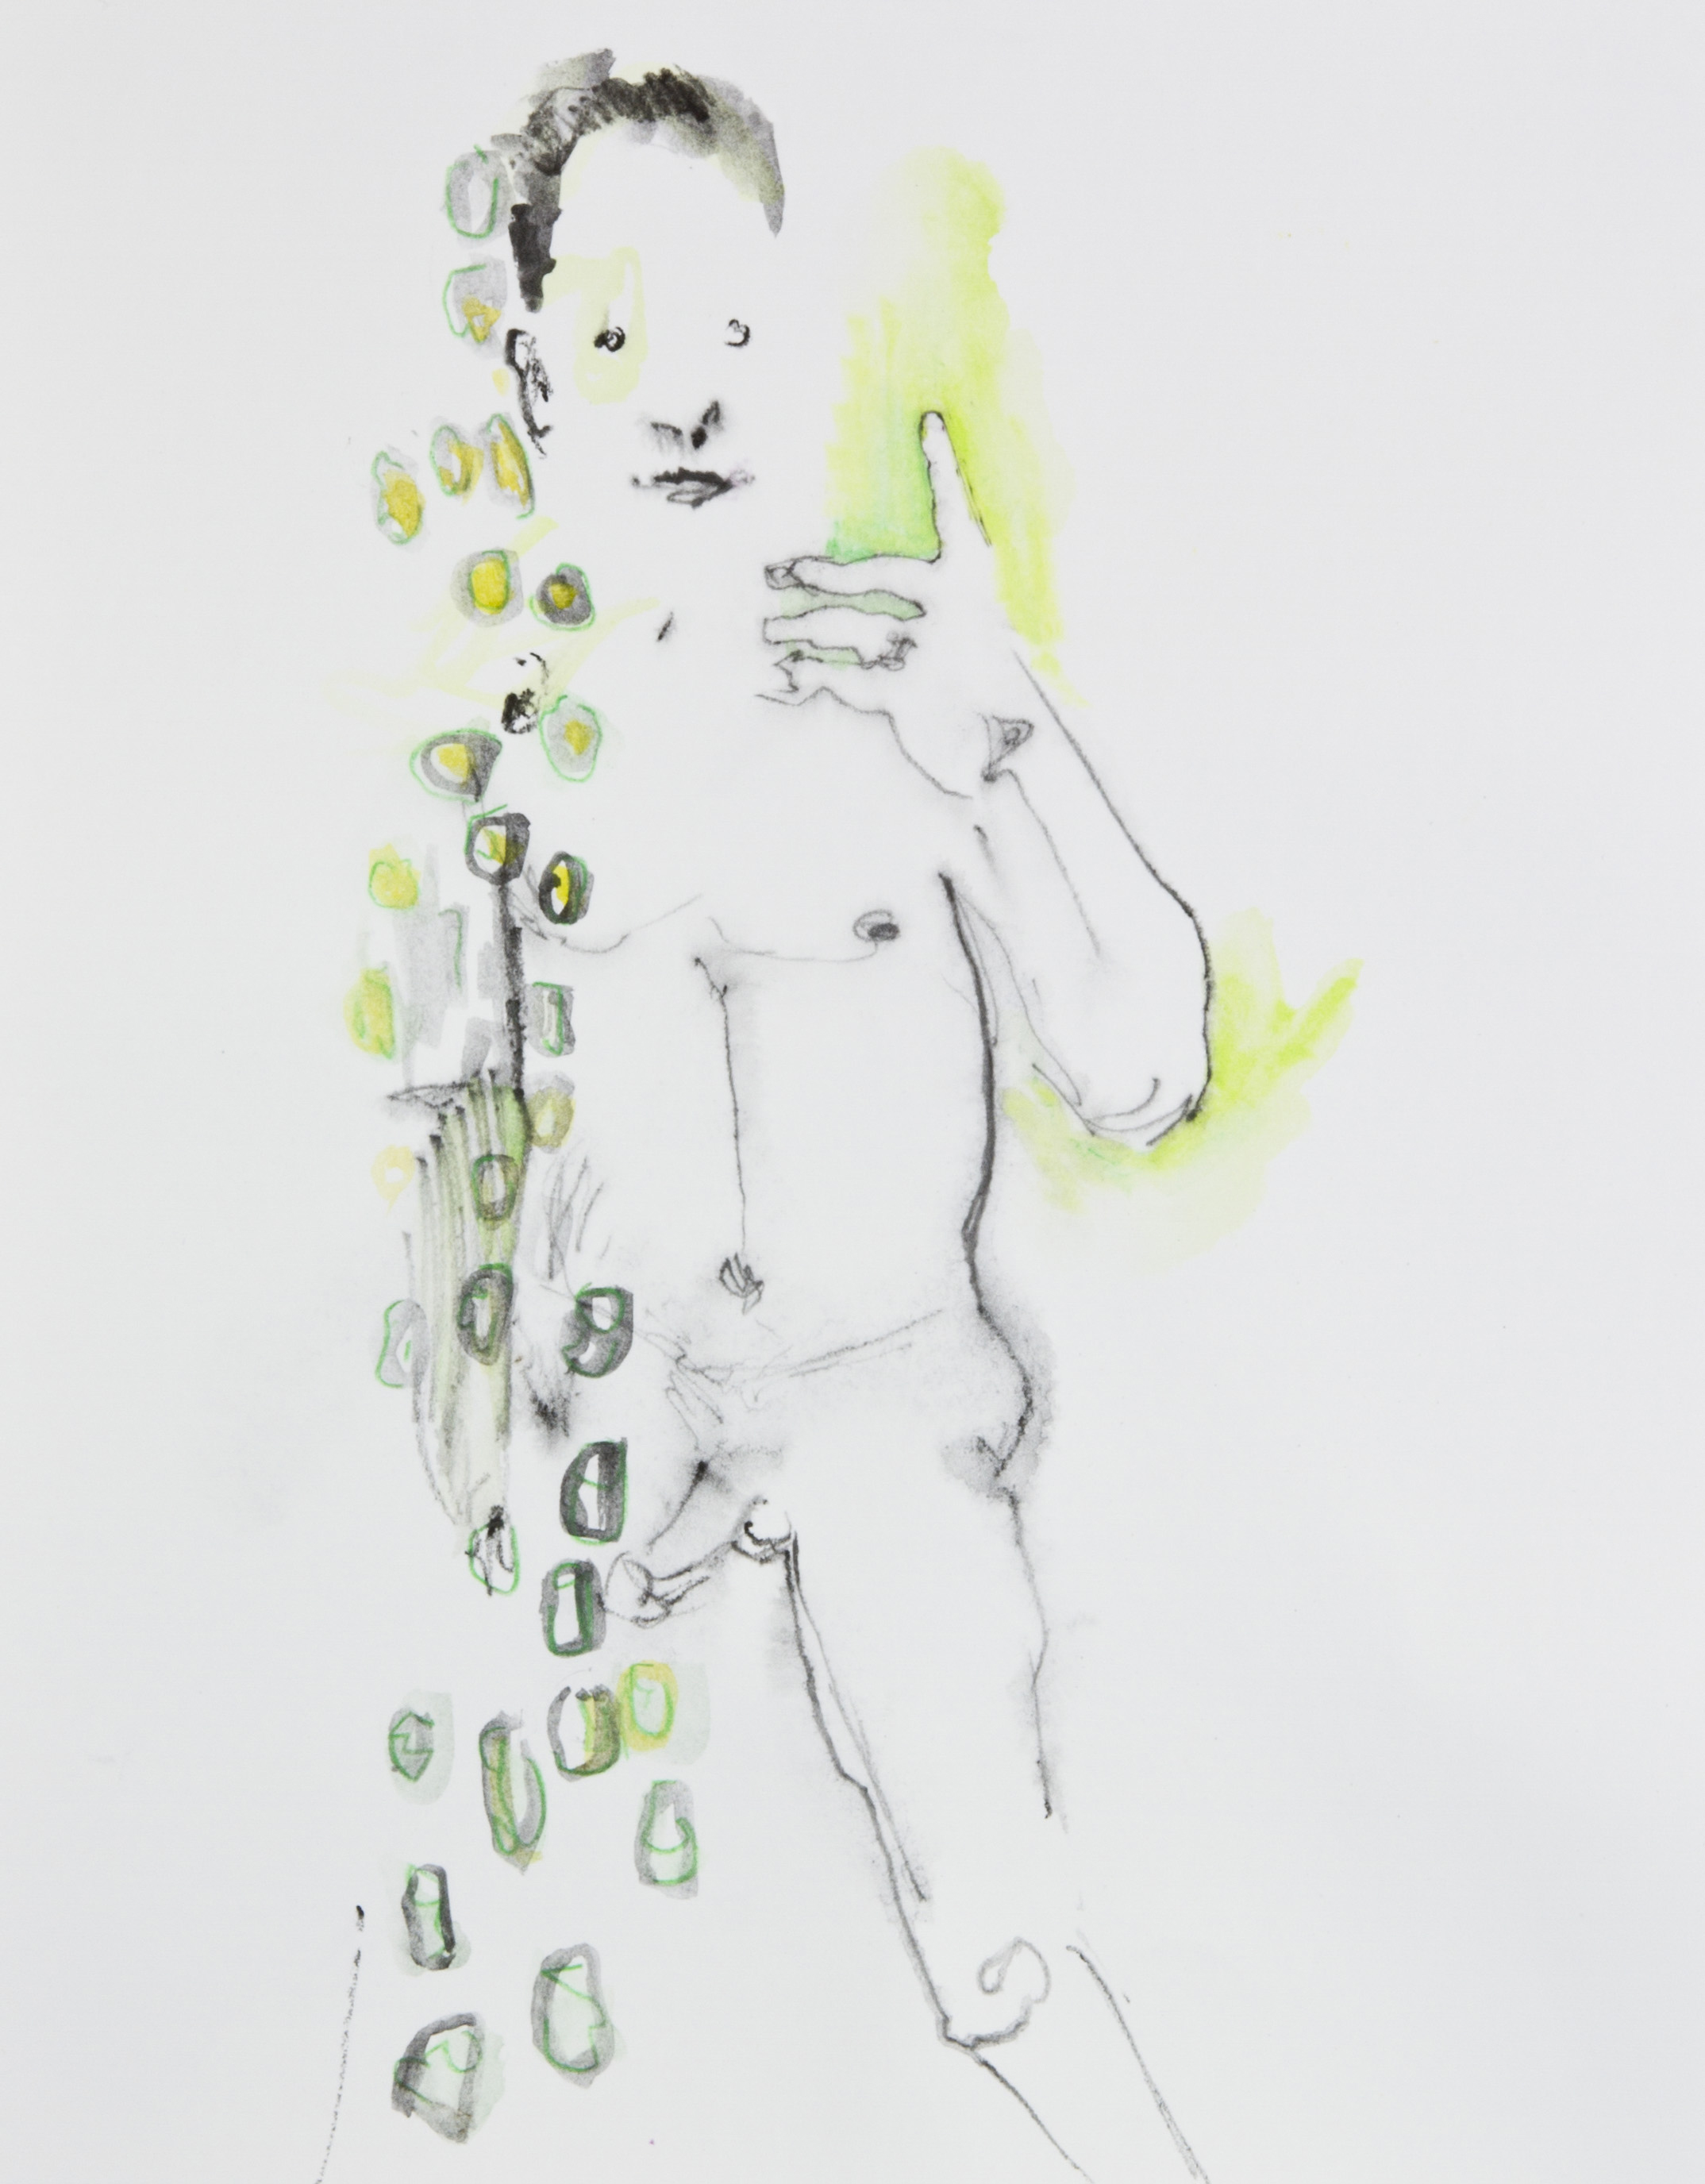 Left Tingle, 2013, graphite, crayon and watercolor pencil on paper, 11x14 inches